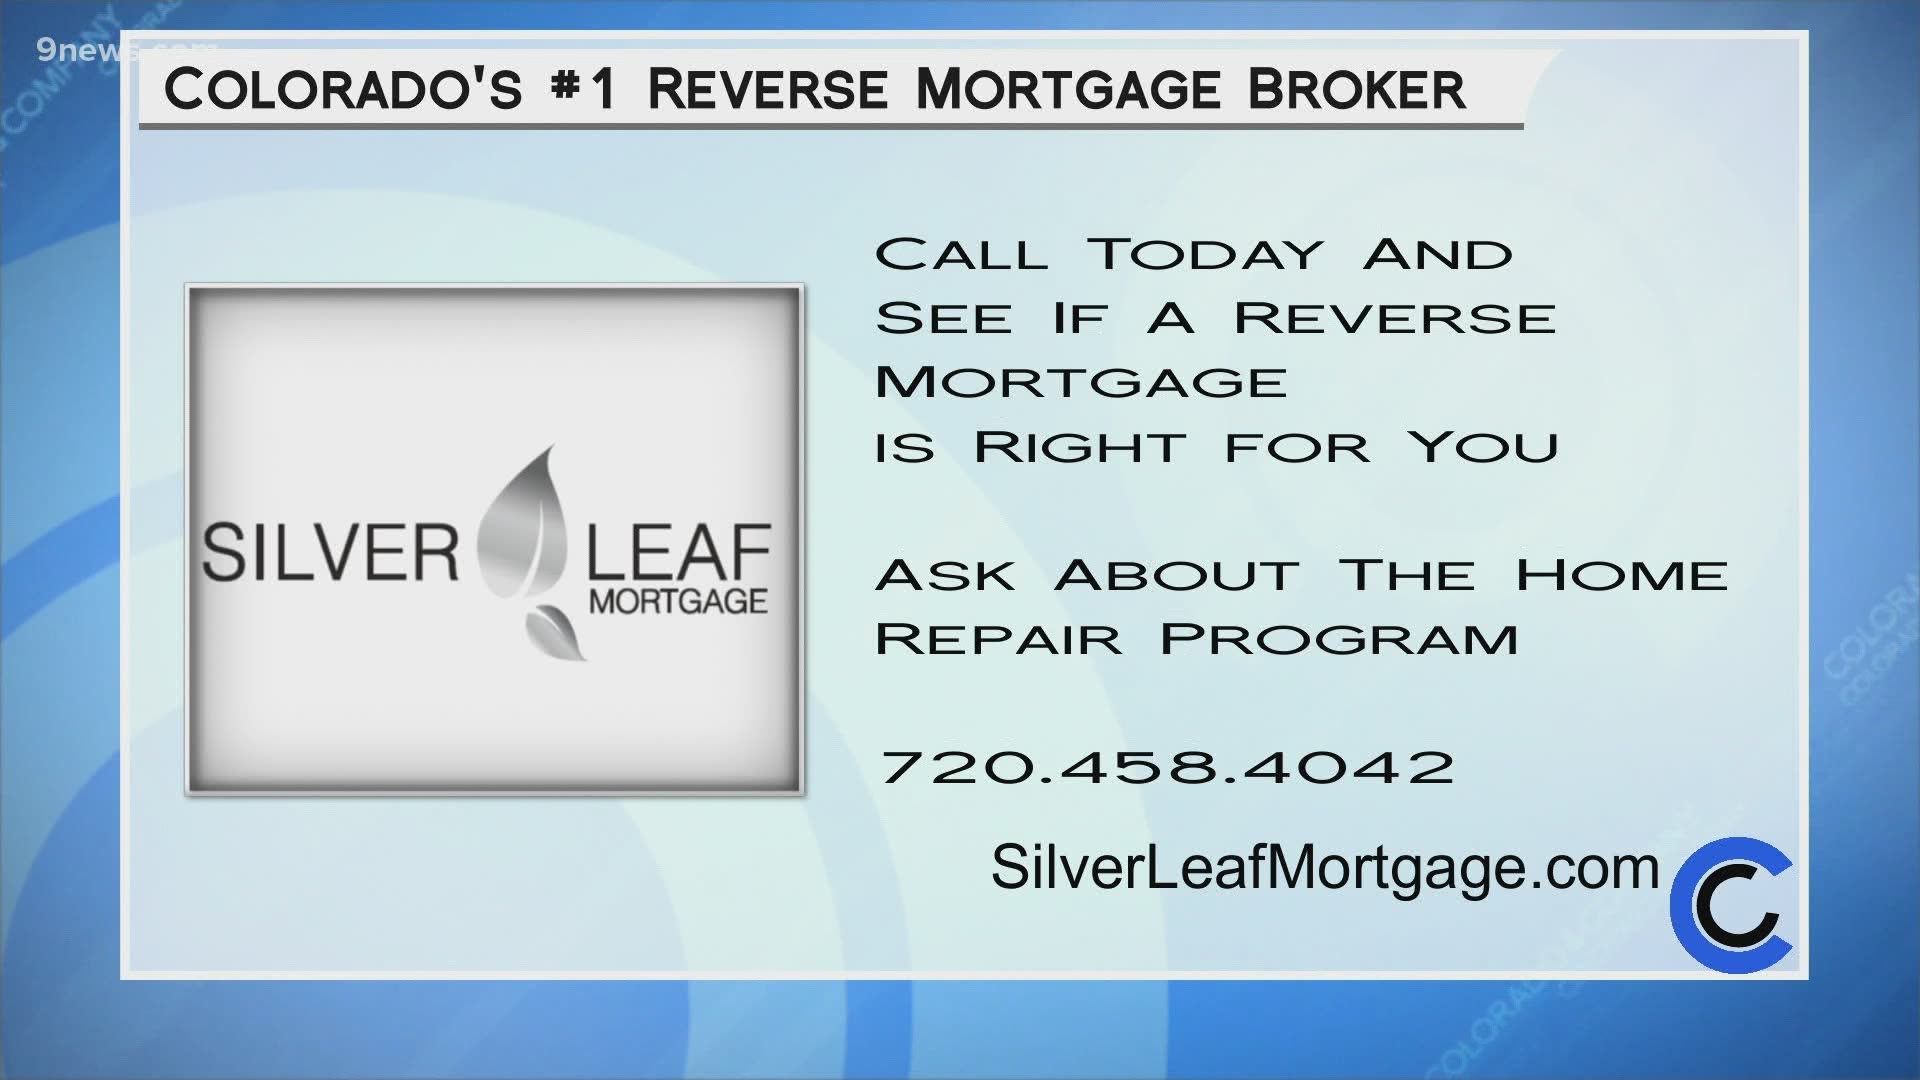 Call 720.458.4042 or visit SilverLeafMortgage.com to find out if a reverse mortgage is the right choice for you.